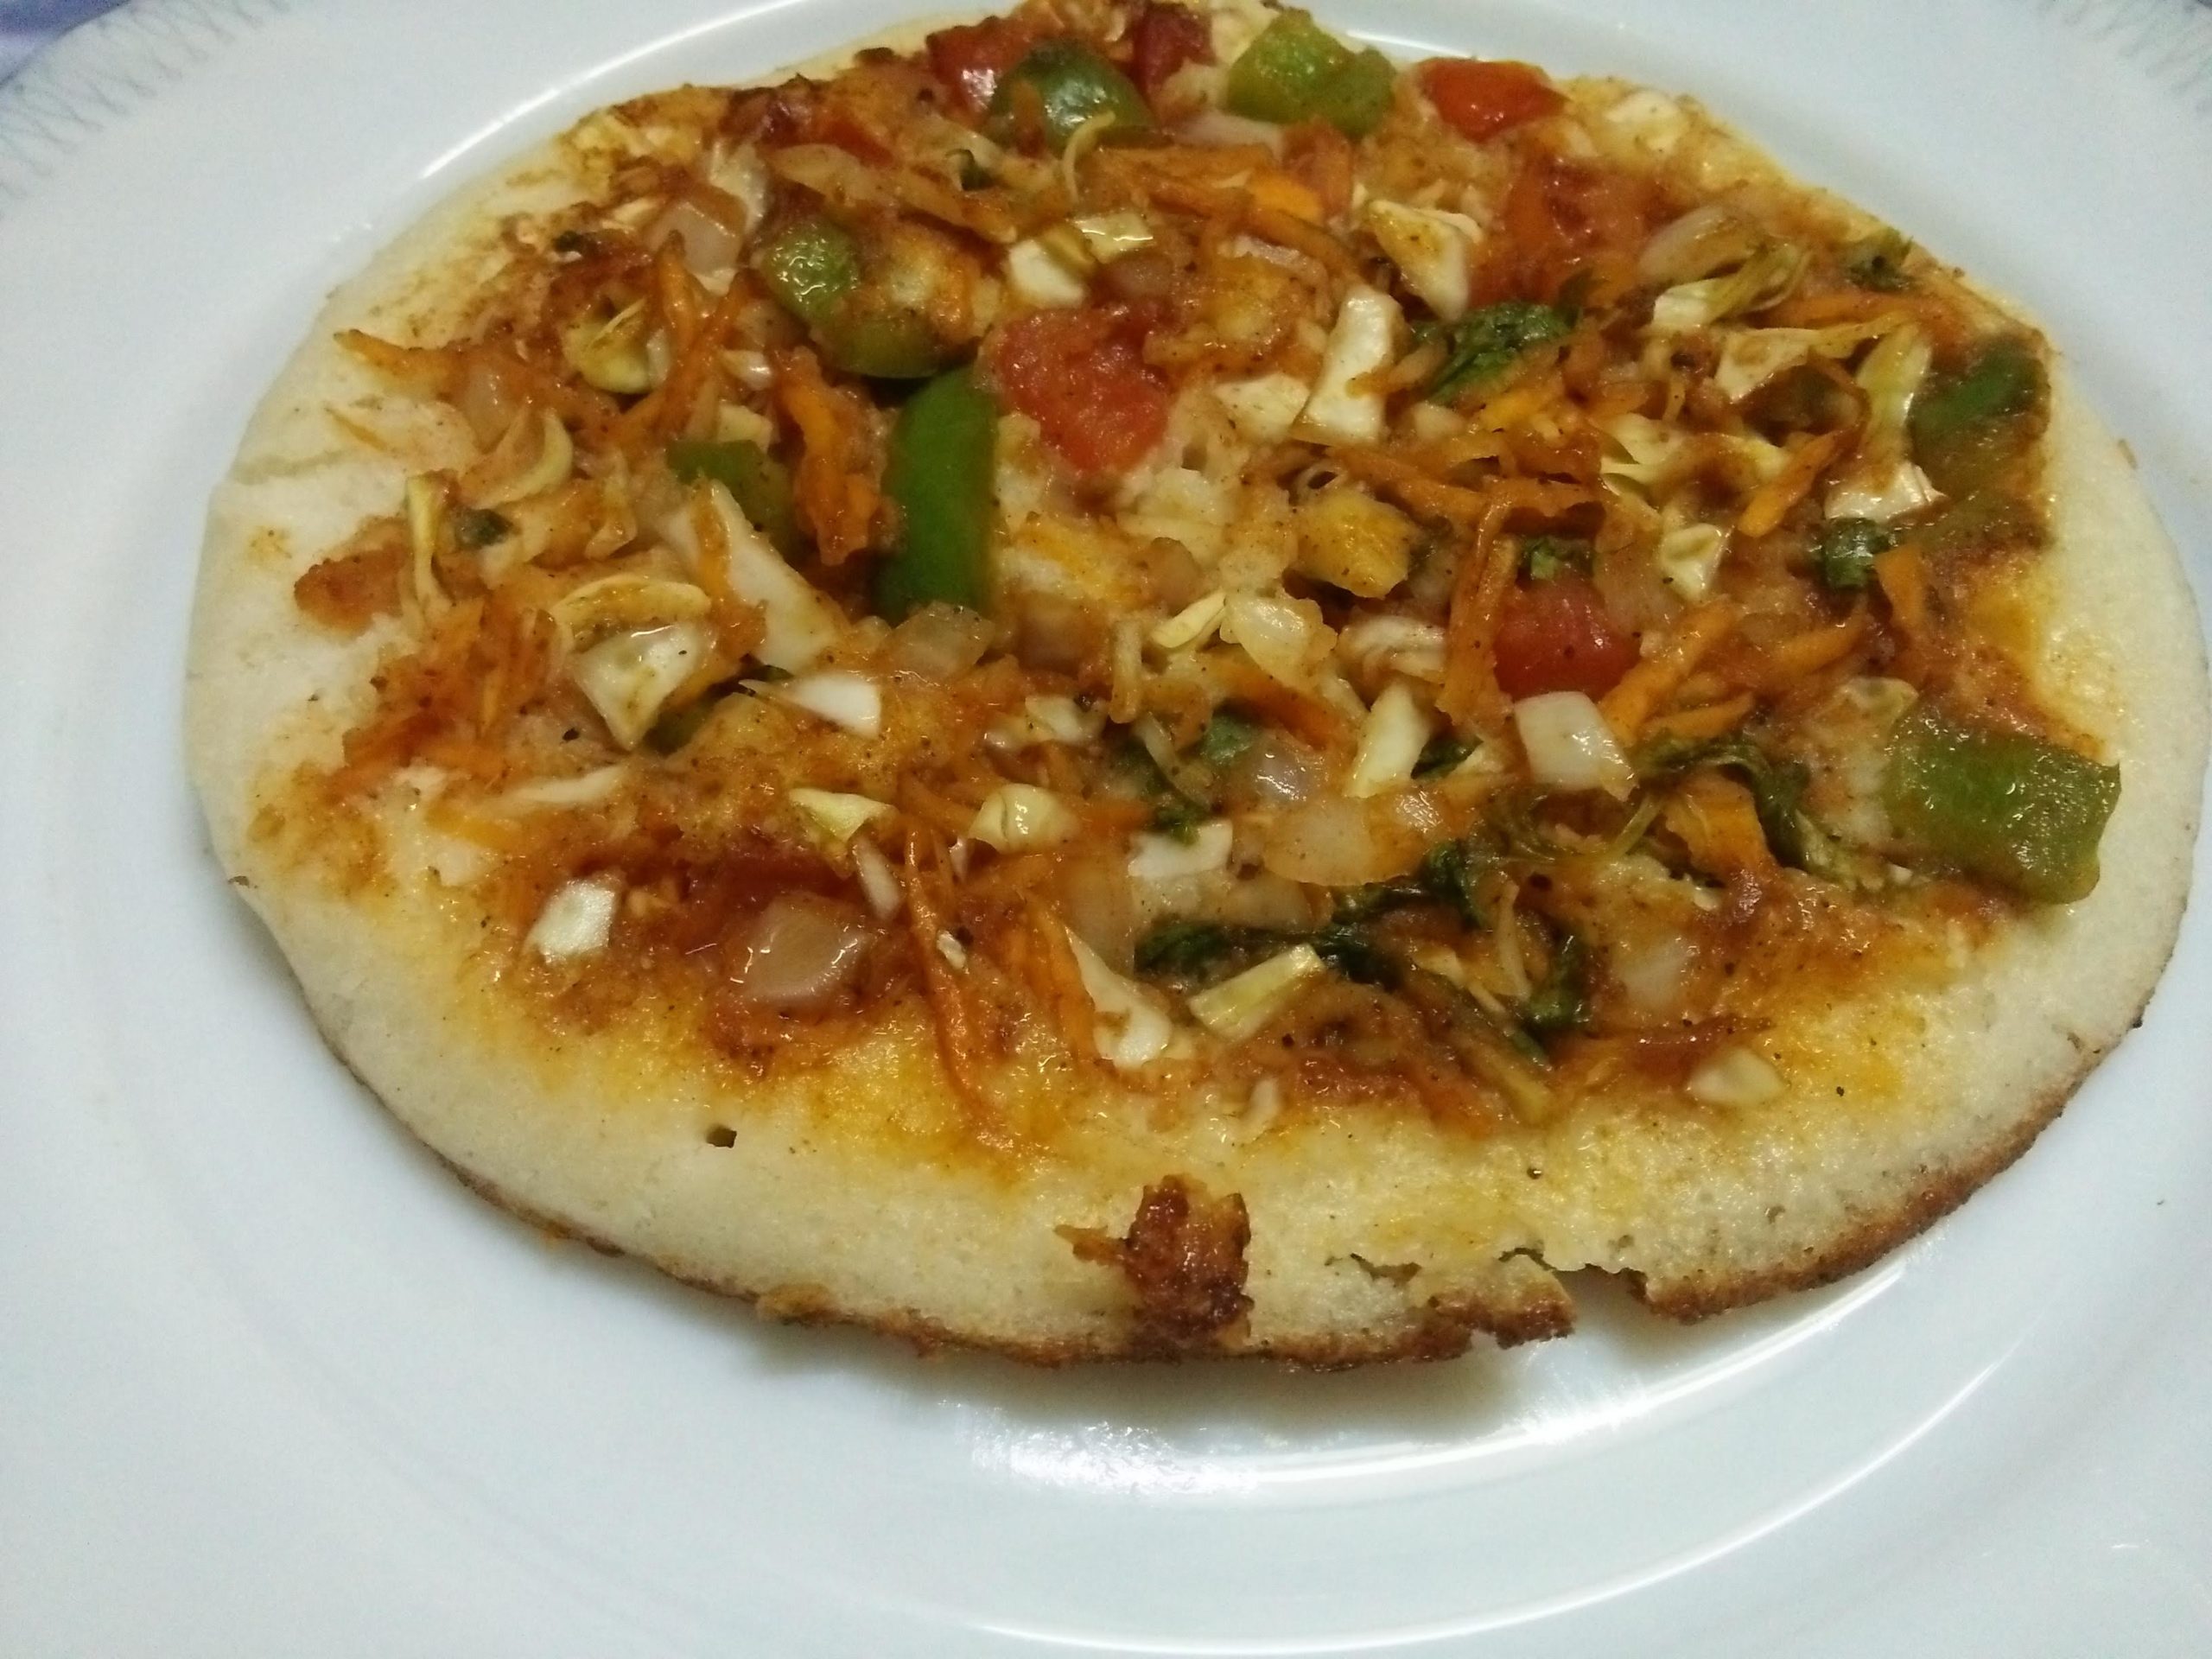 Veg Uttapam with onion and tomato toppings